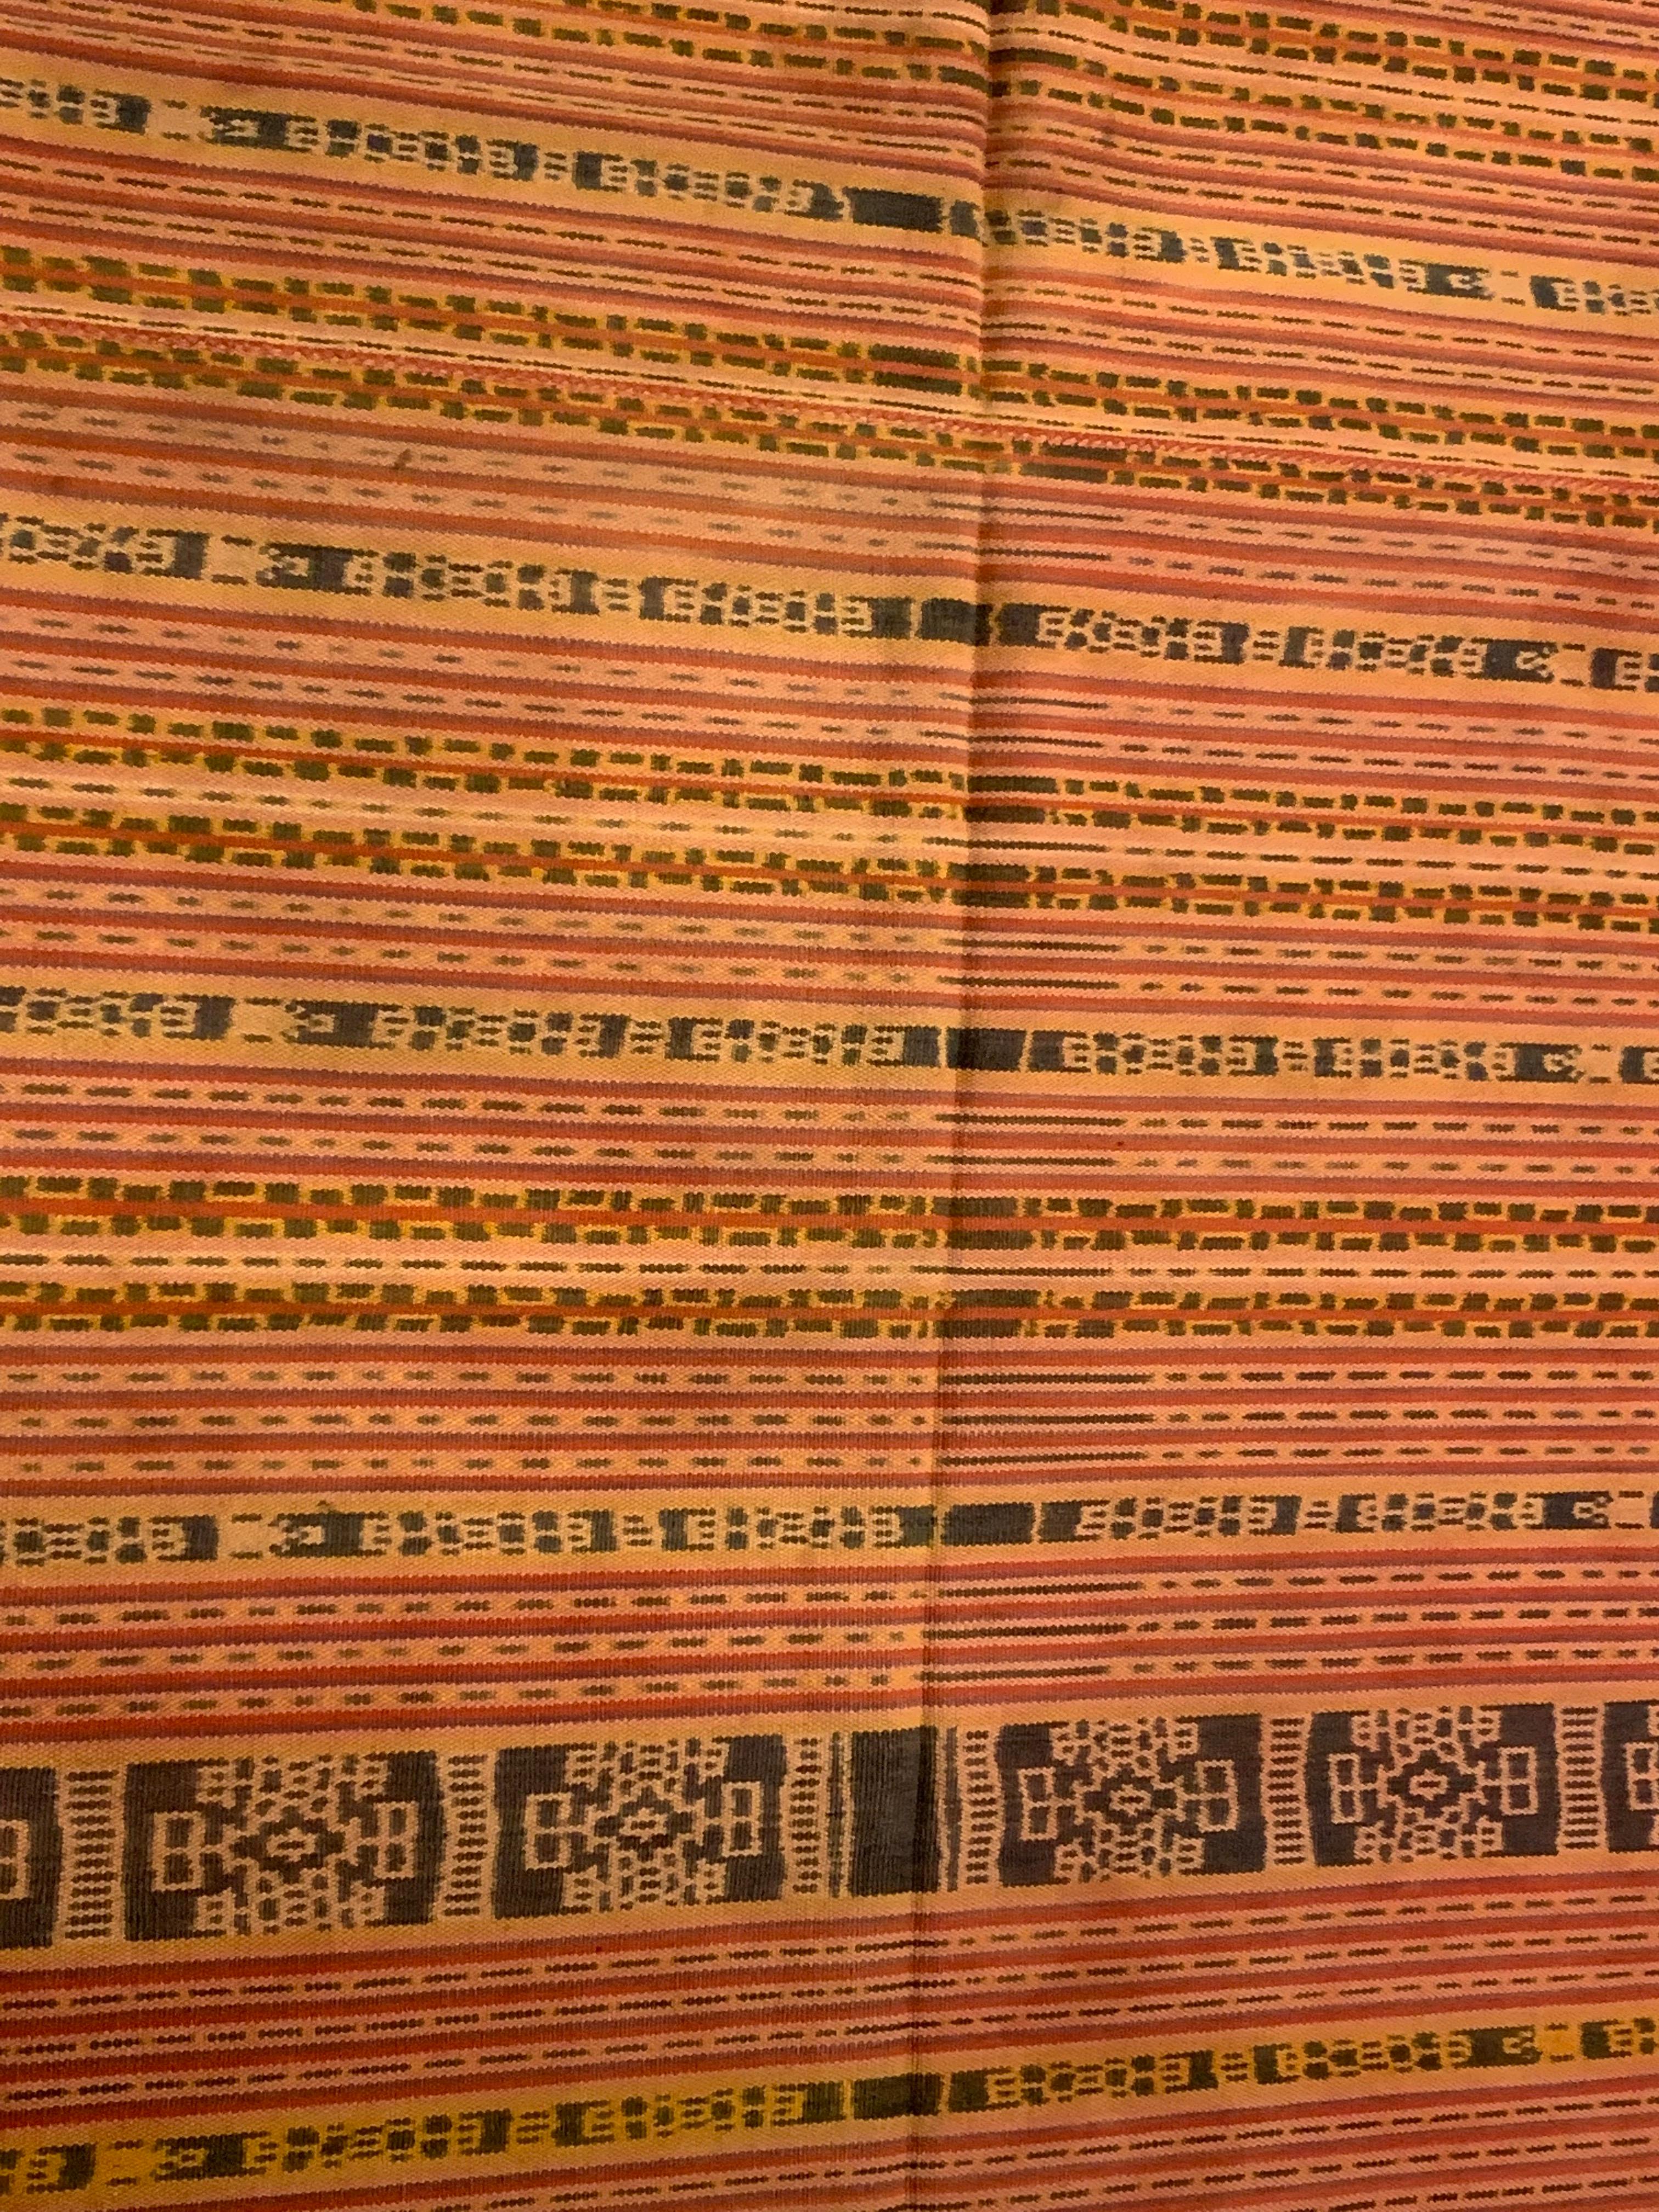 Rare Ikat Textile from Timor Stunning Tribal Motifs & Colors, Indonesia c. 1900 In Good Condition For Sale In Jimbaran, Bali